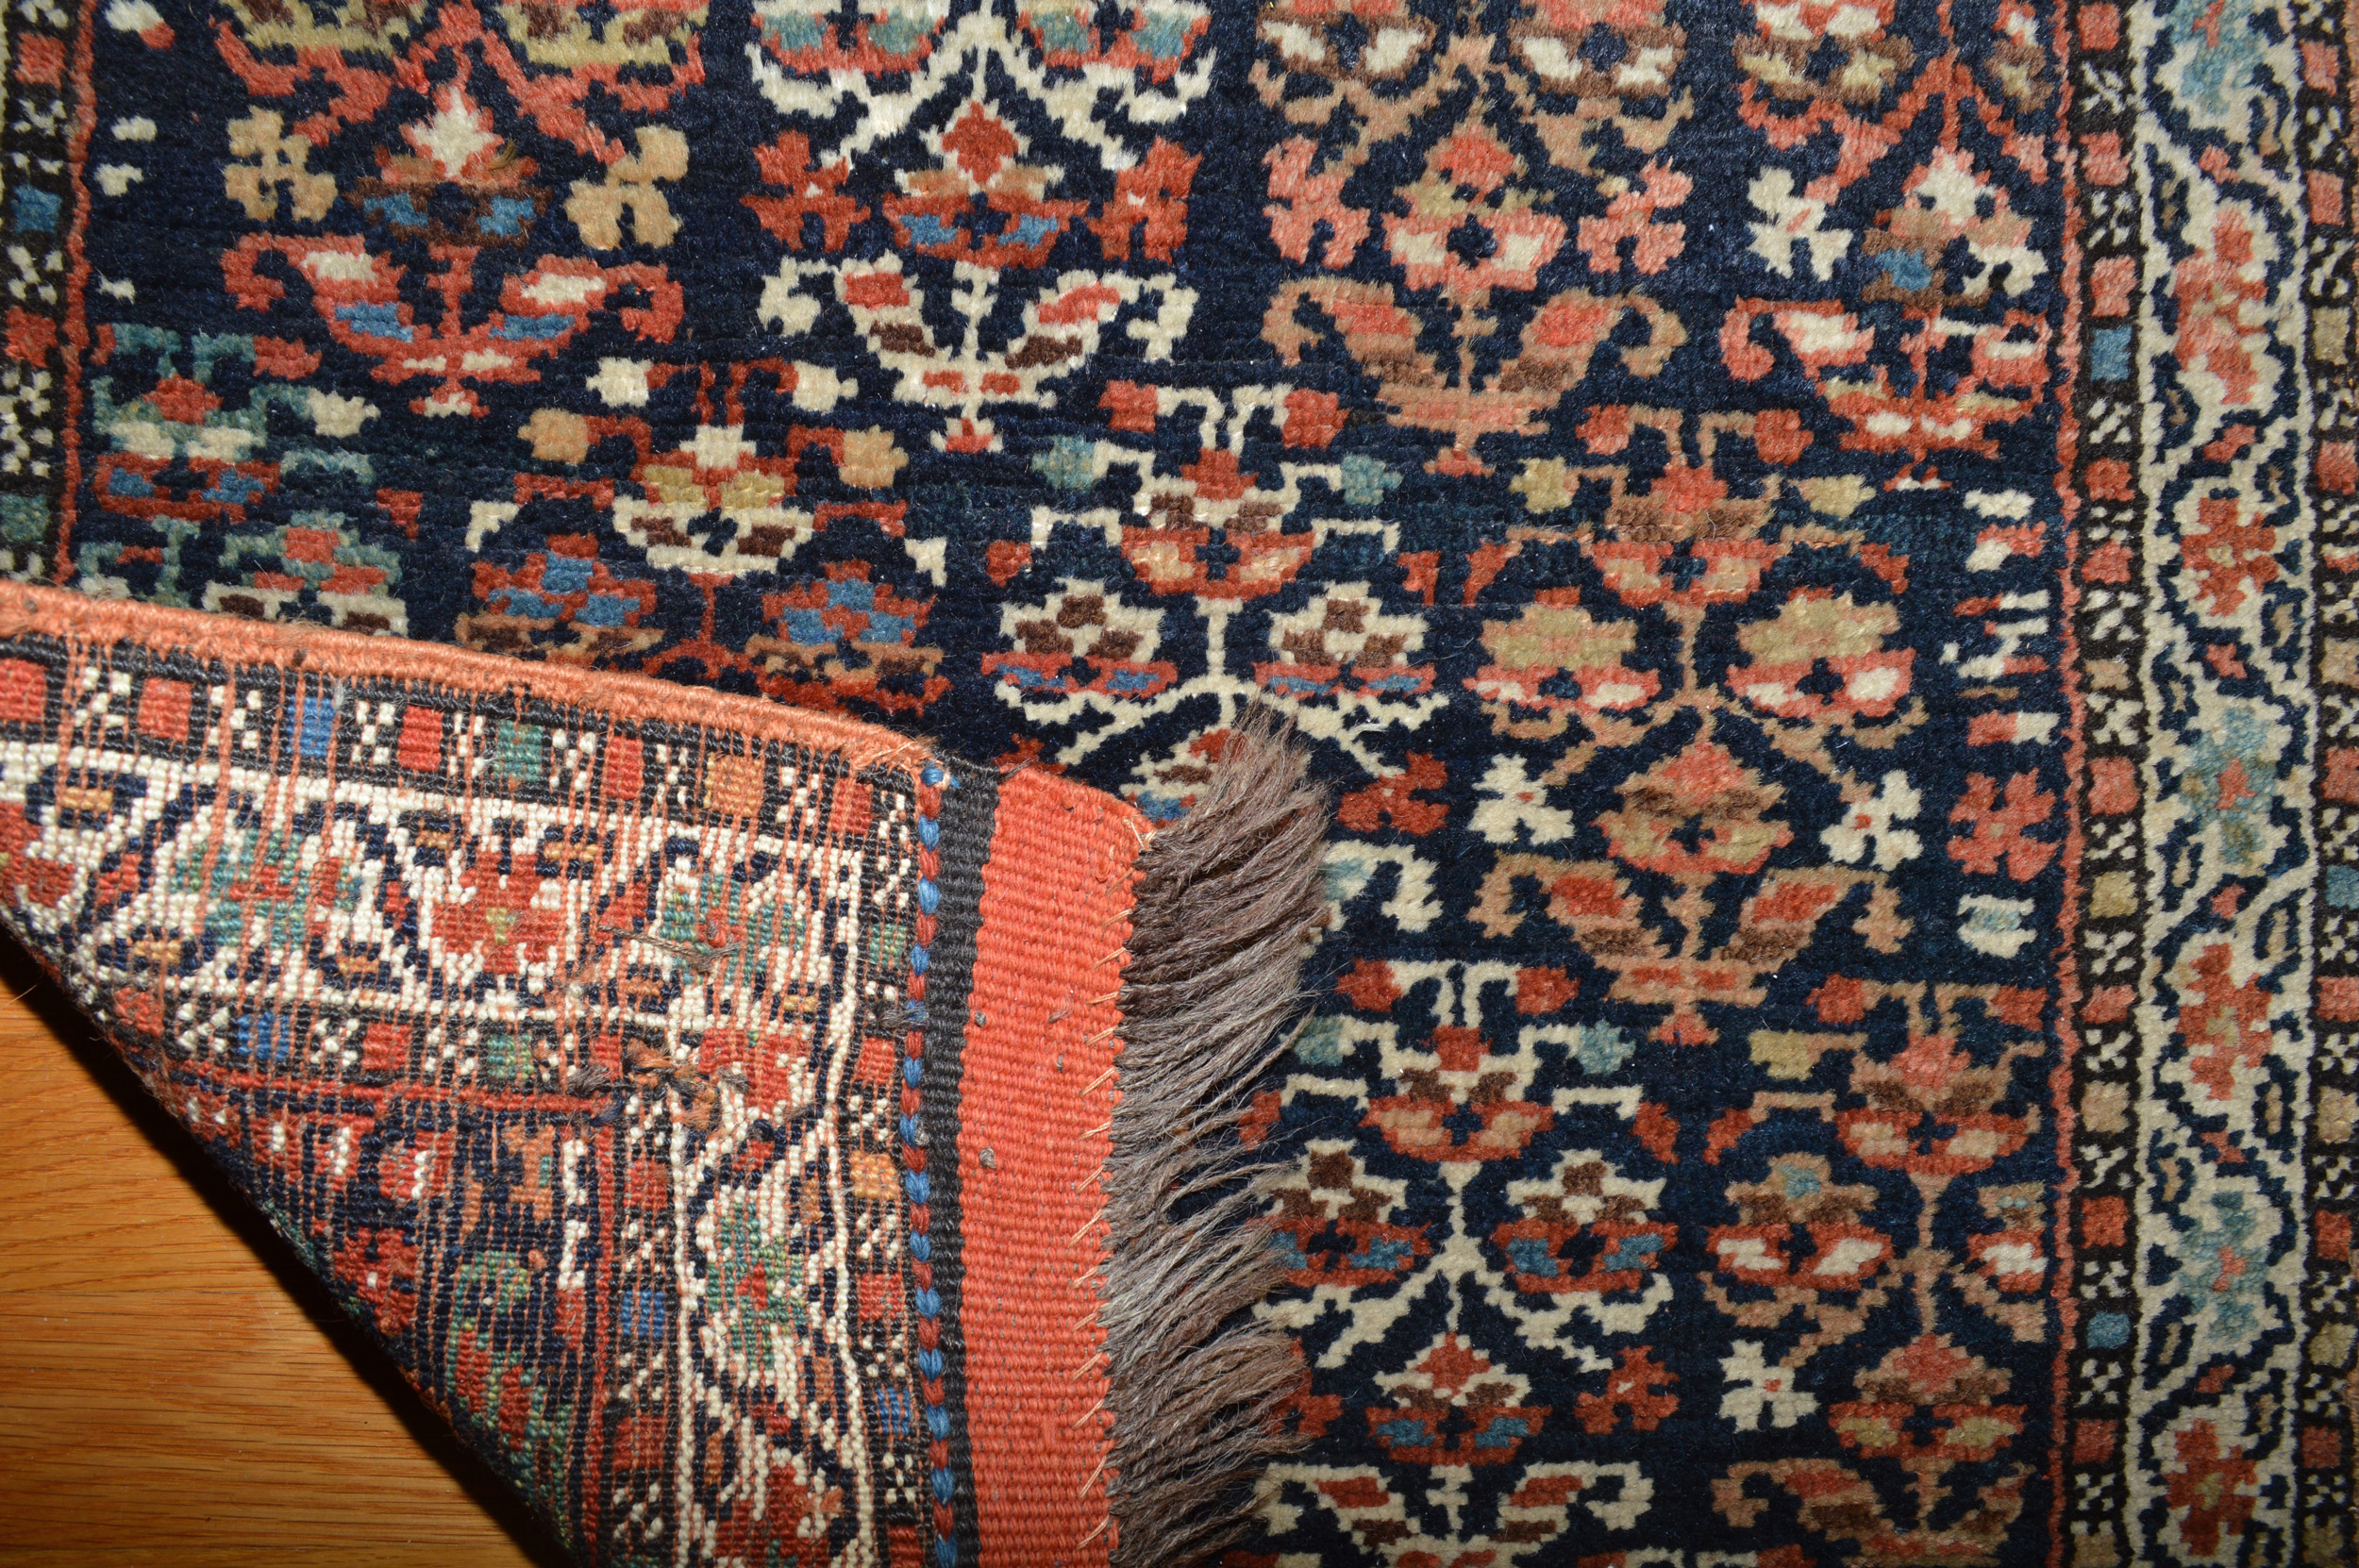 Detail of an antique northwest Persian bag face, woven either by the Shah Savan or Kurdish people. Douglas Stock Gallery, antique collectable rugs and bags, antique rugs Boston,MA area New England